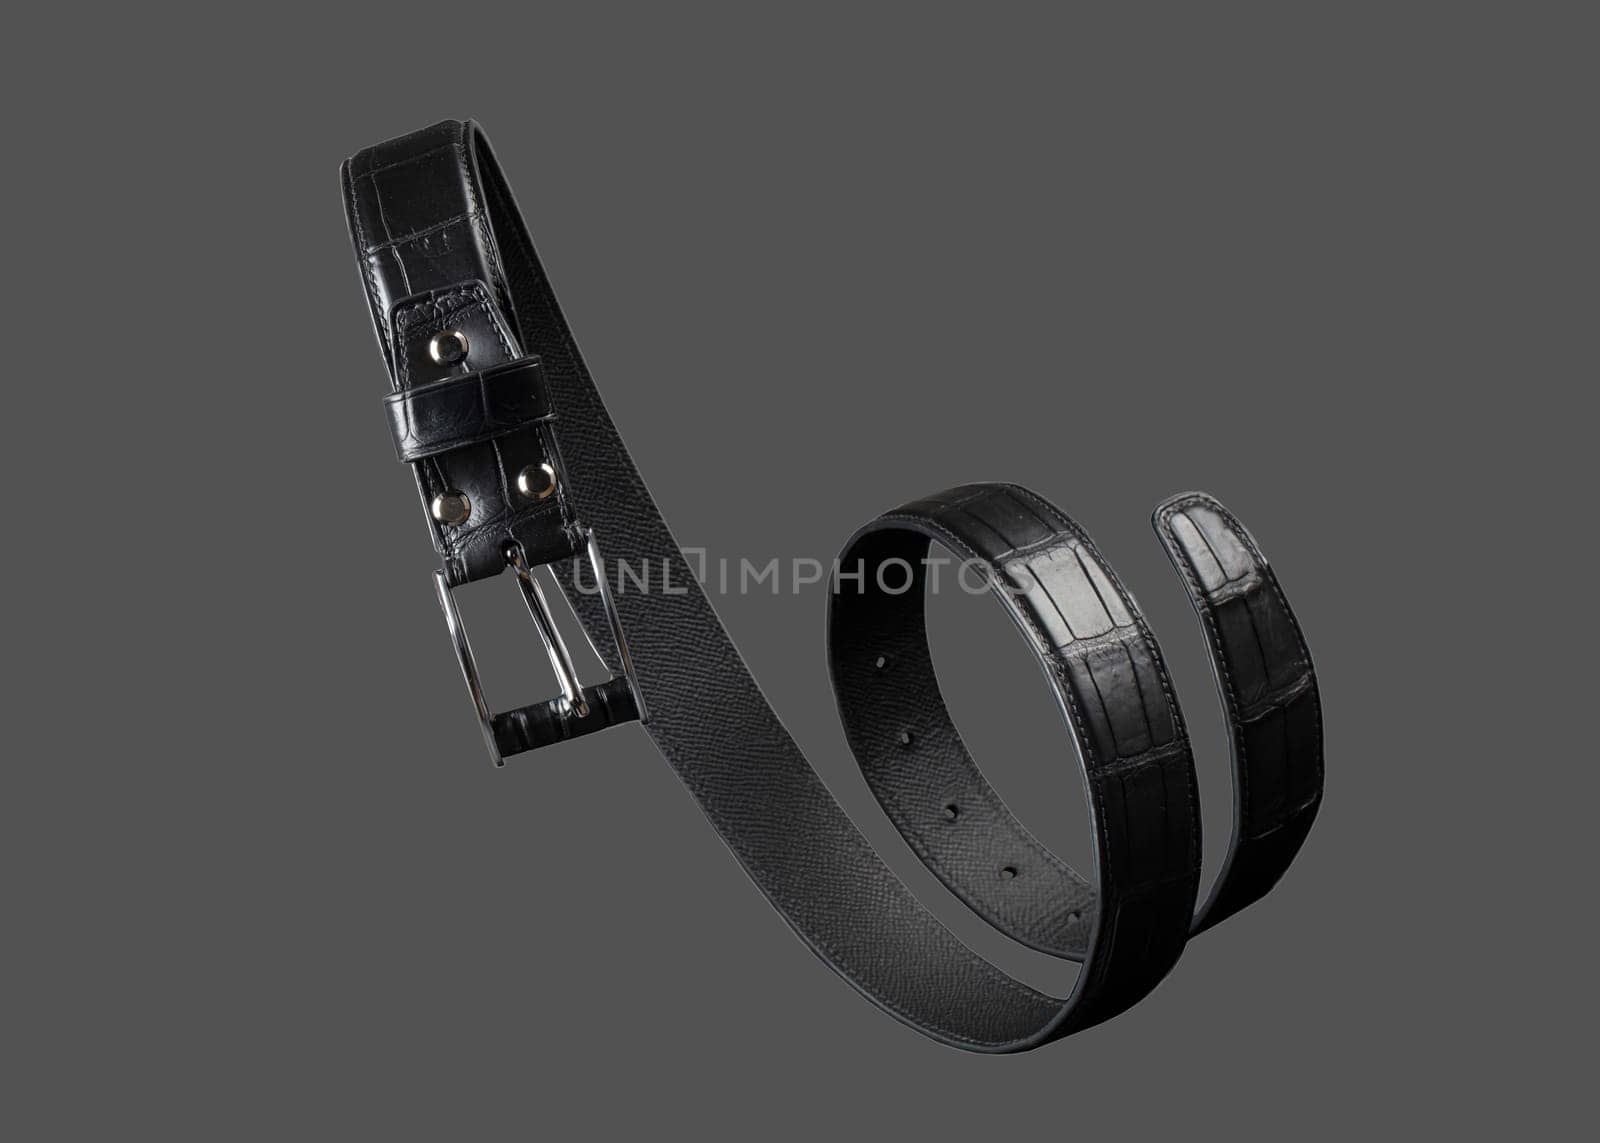 Black leather belt twisted in a spiral on a gray background. by Sviatlana